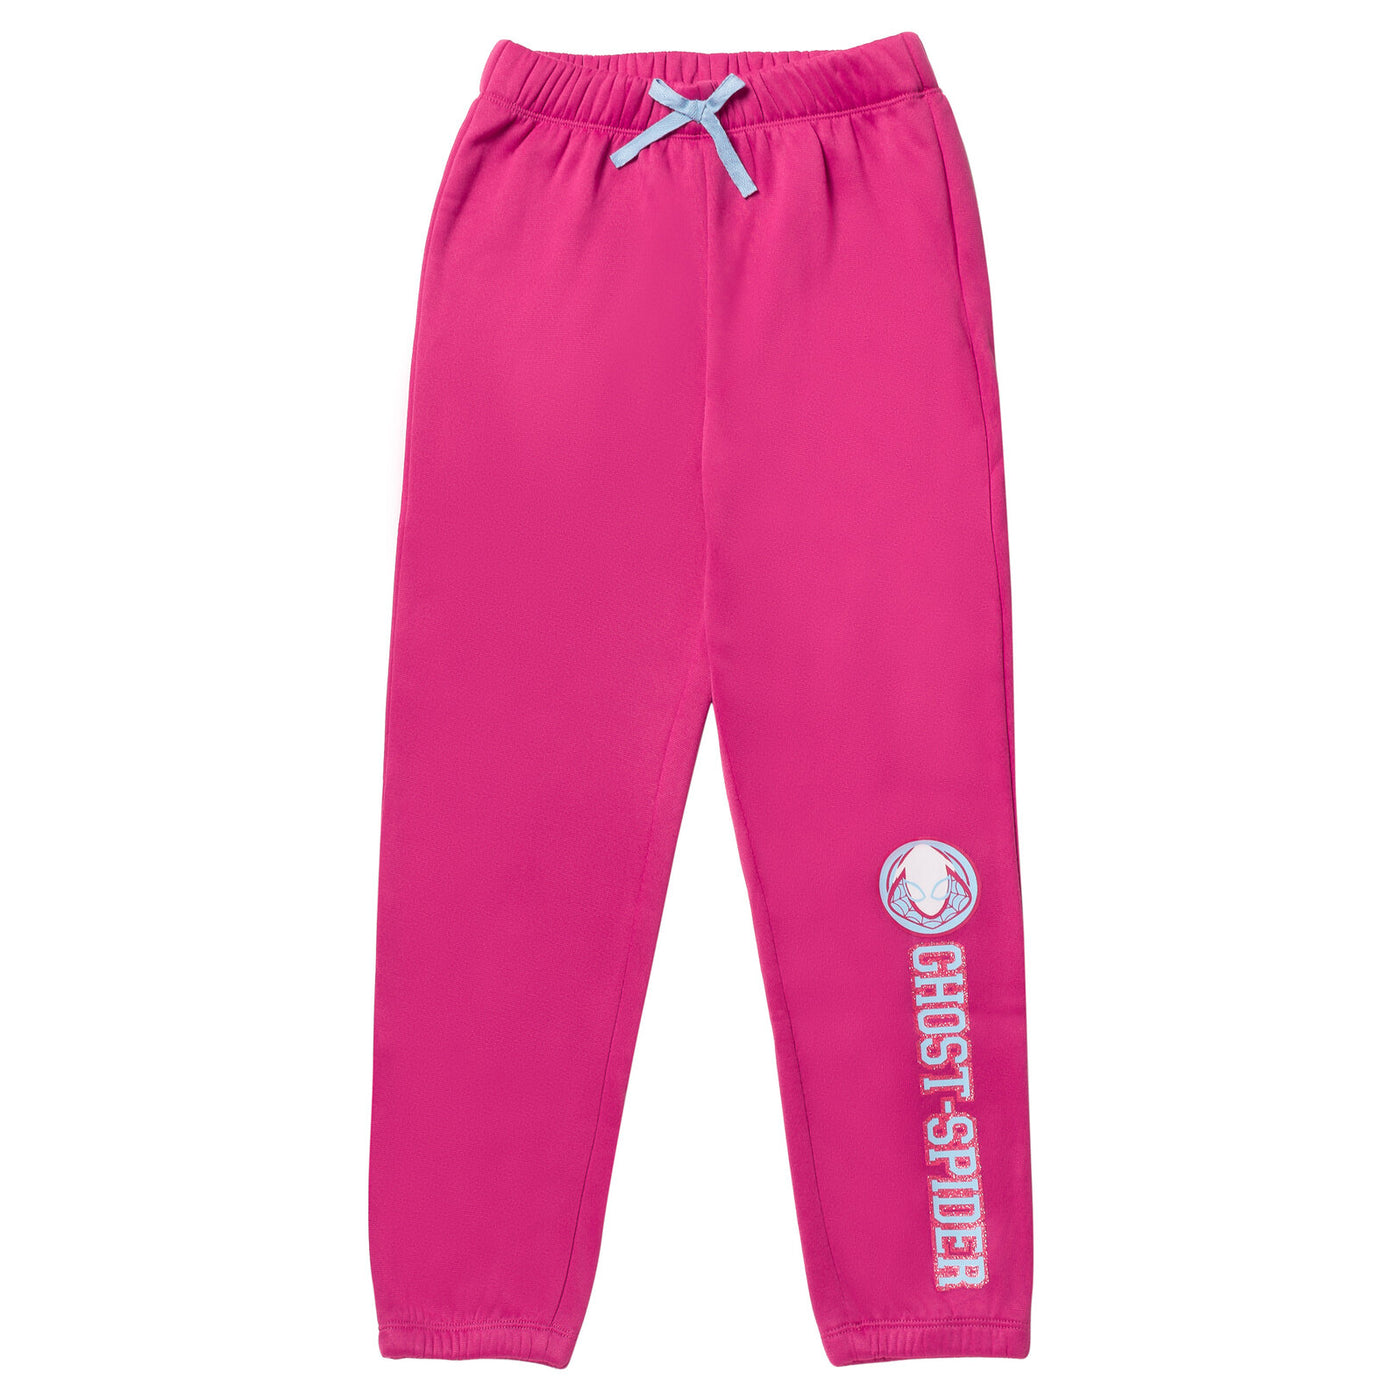 Marvel Spider-Gwen French Terry Sweatshirt and Jogger Pants Set